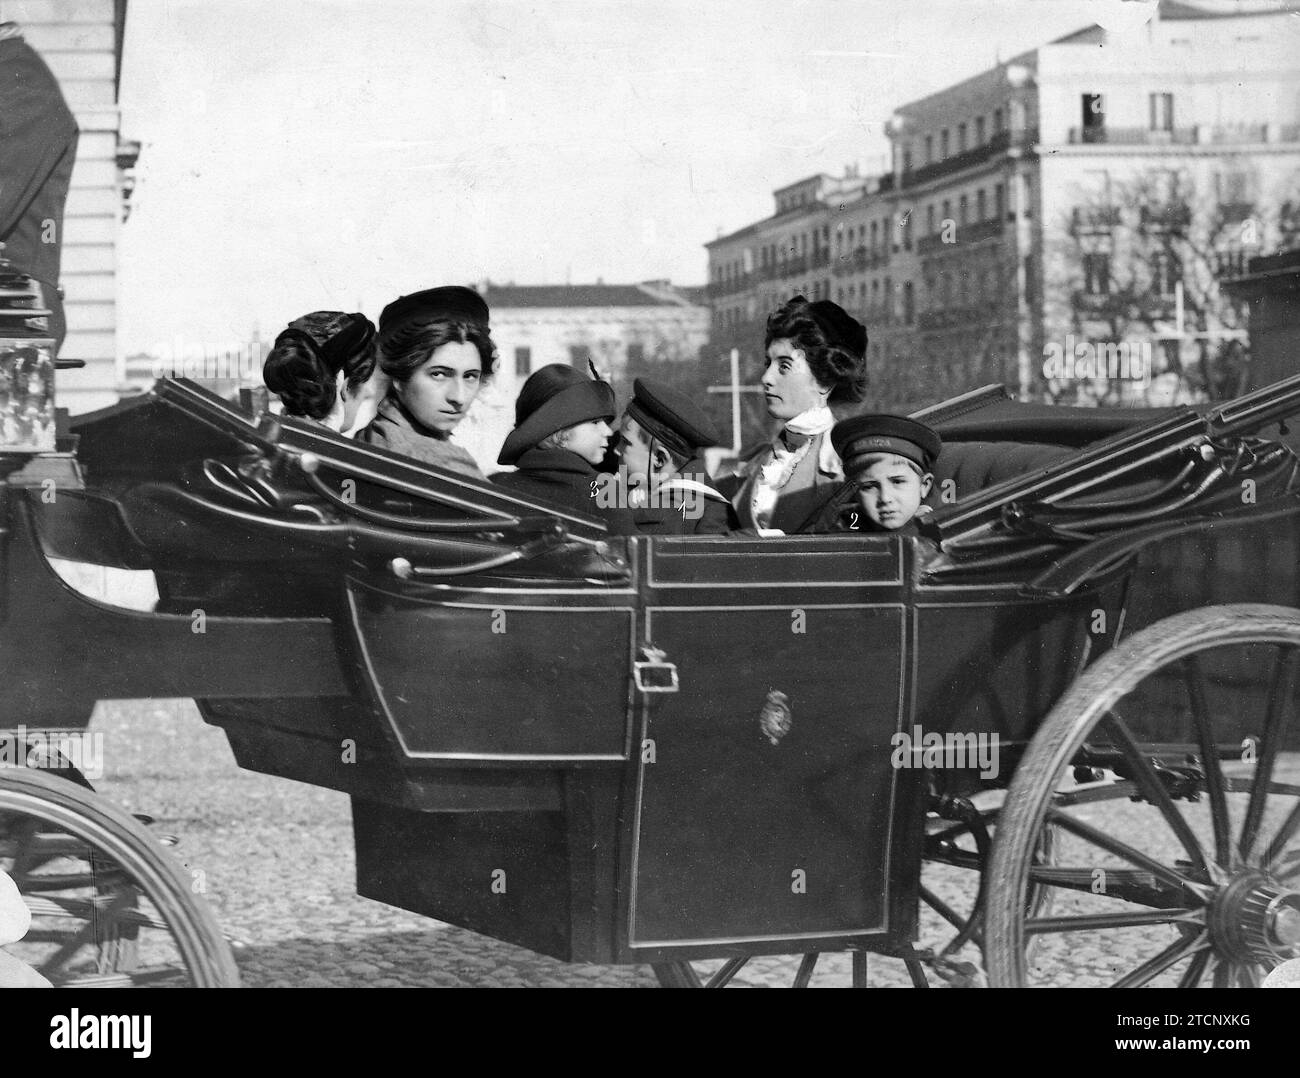 01/17/1913. The Children of the Kings of Spain. The Prince of Asturias (1), the Infante D. Jaime (2) and the Infanta Beatriz (3) Upon their return to the palace after their visit to the country house yesterday morning. photo duke. Credit: Album / Archivo ABC / Julio Duque Stock Photo